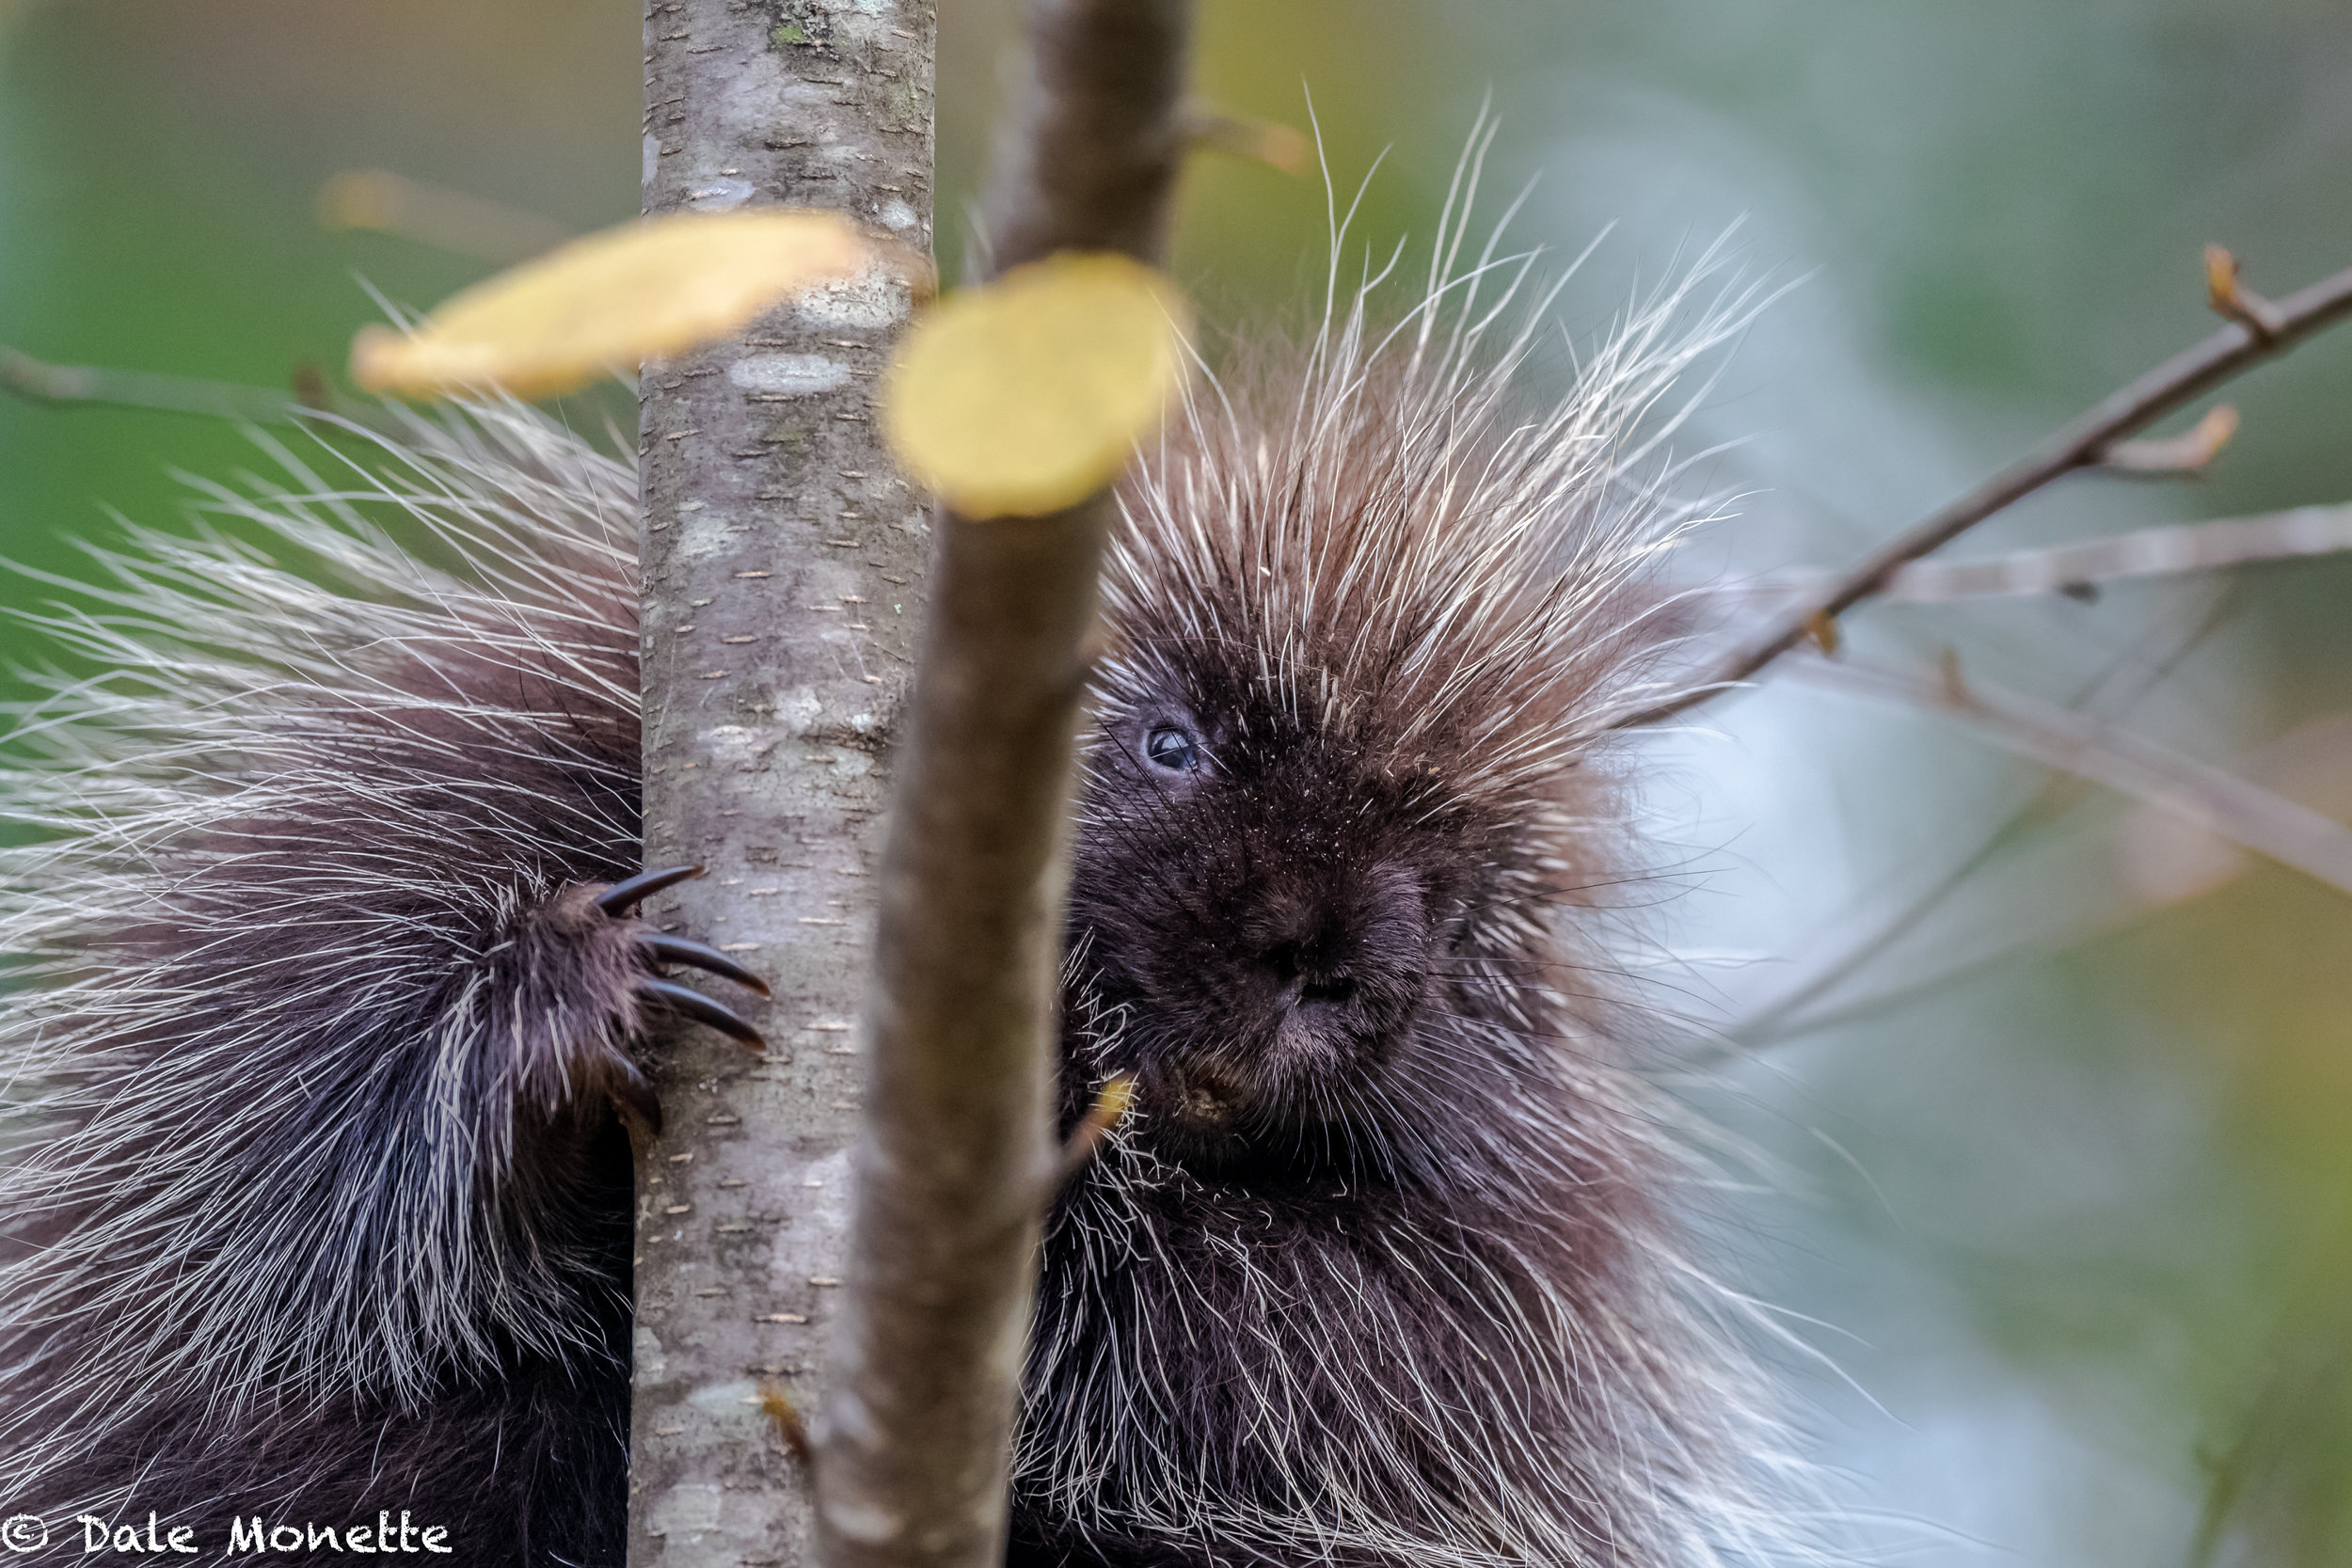   Would you say this young porcupine is having a bad hair day ?  